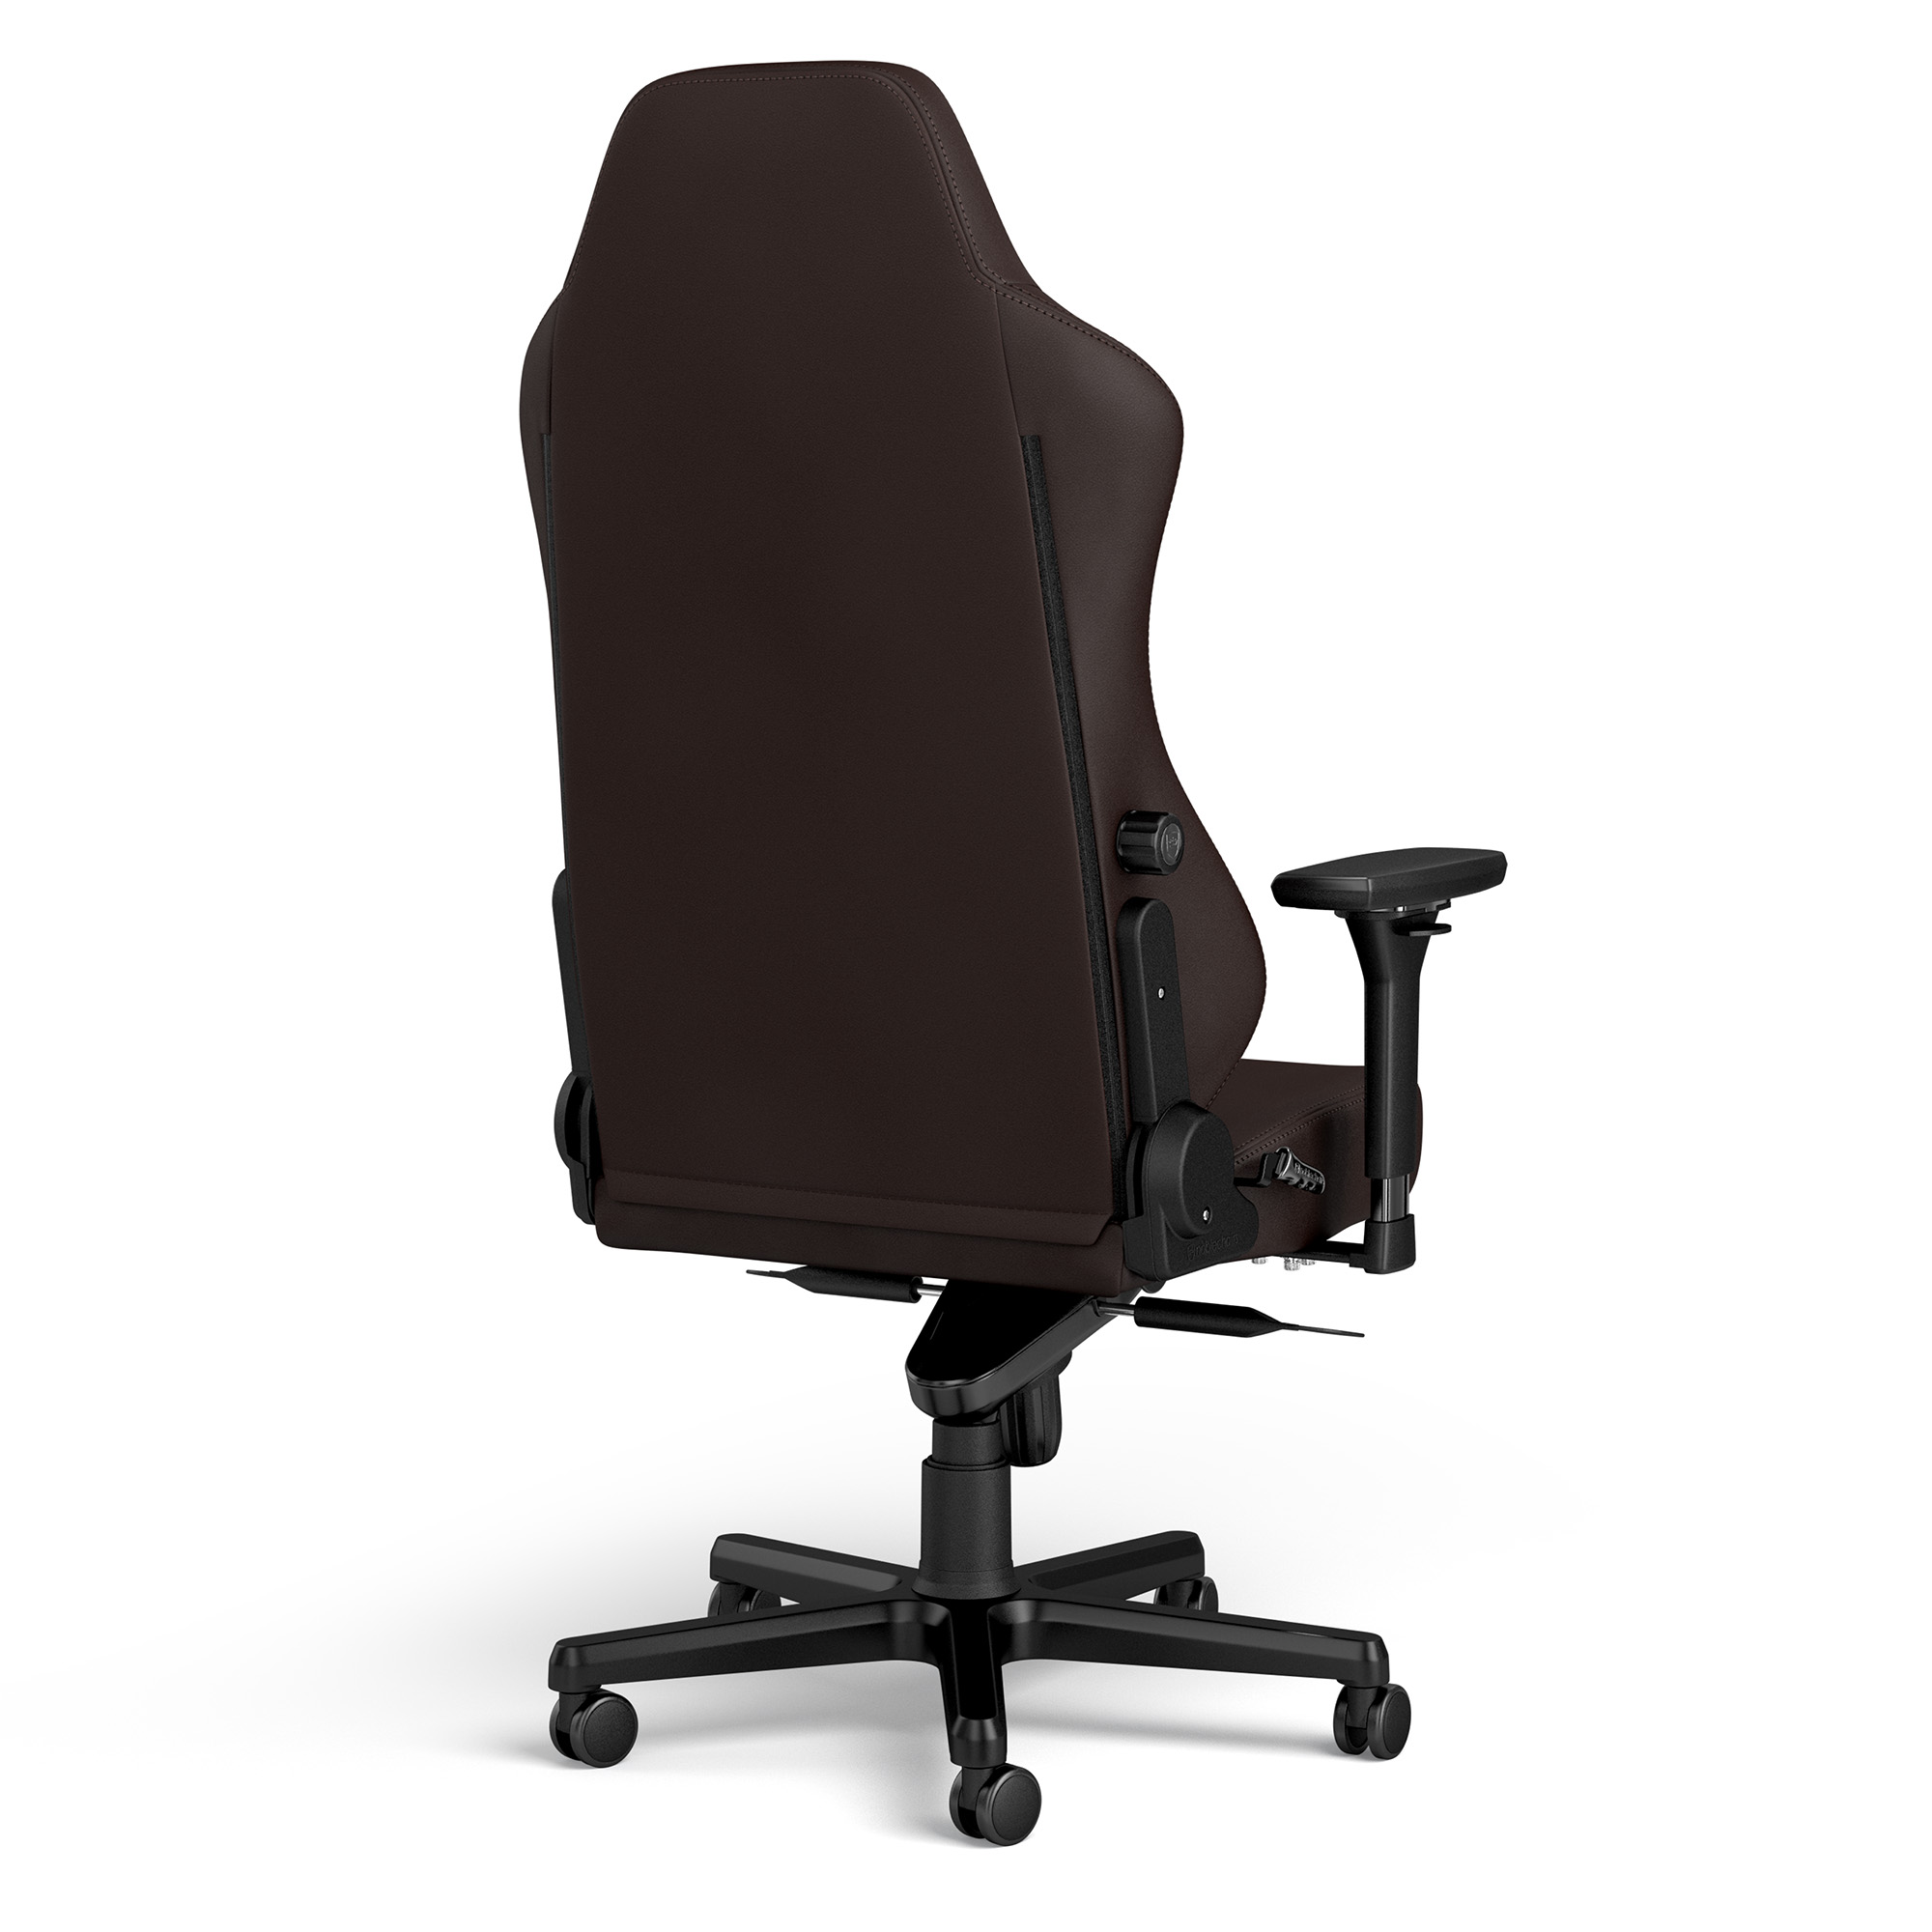 noblechairs - noblechairs HERO Gaming Chair - Java Edition